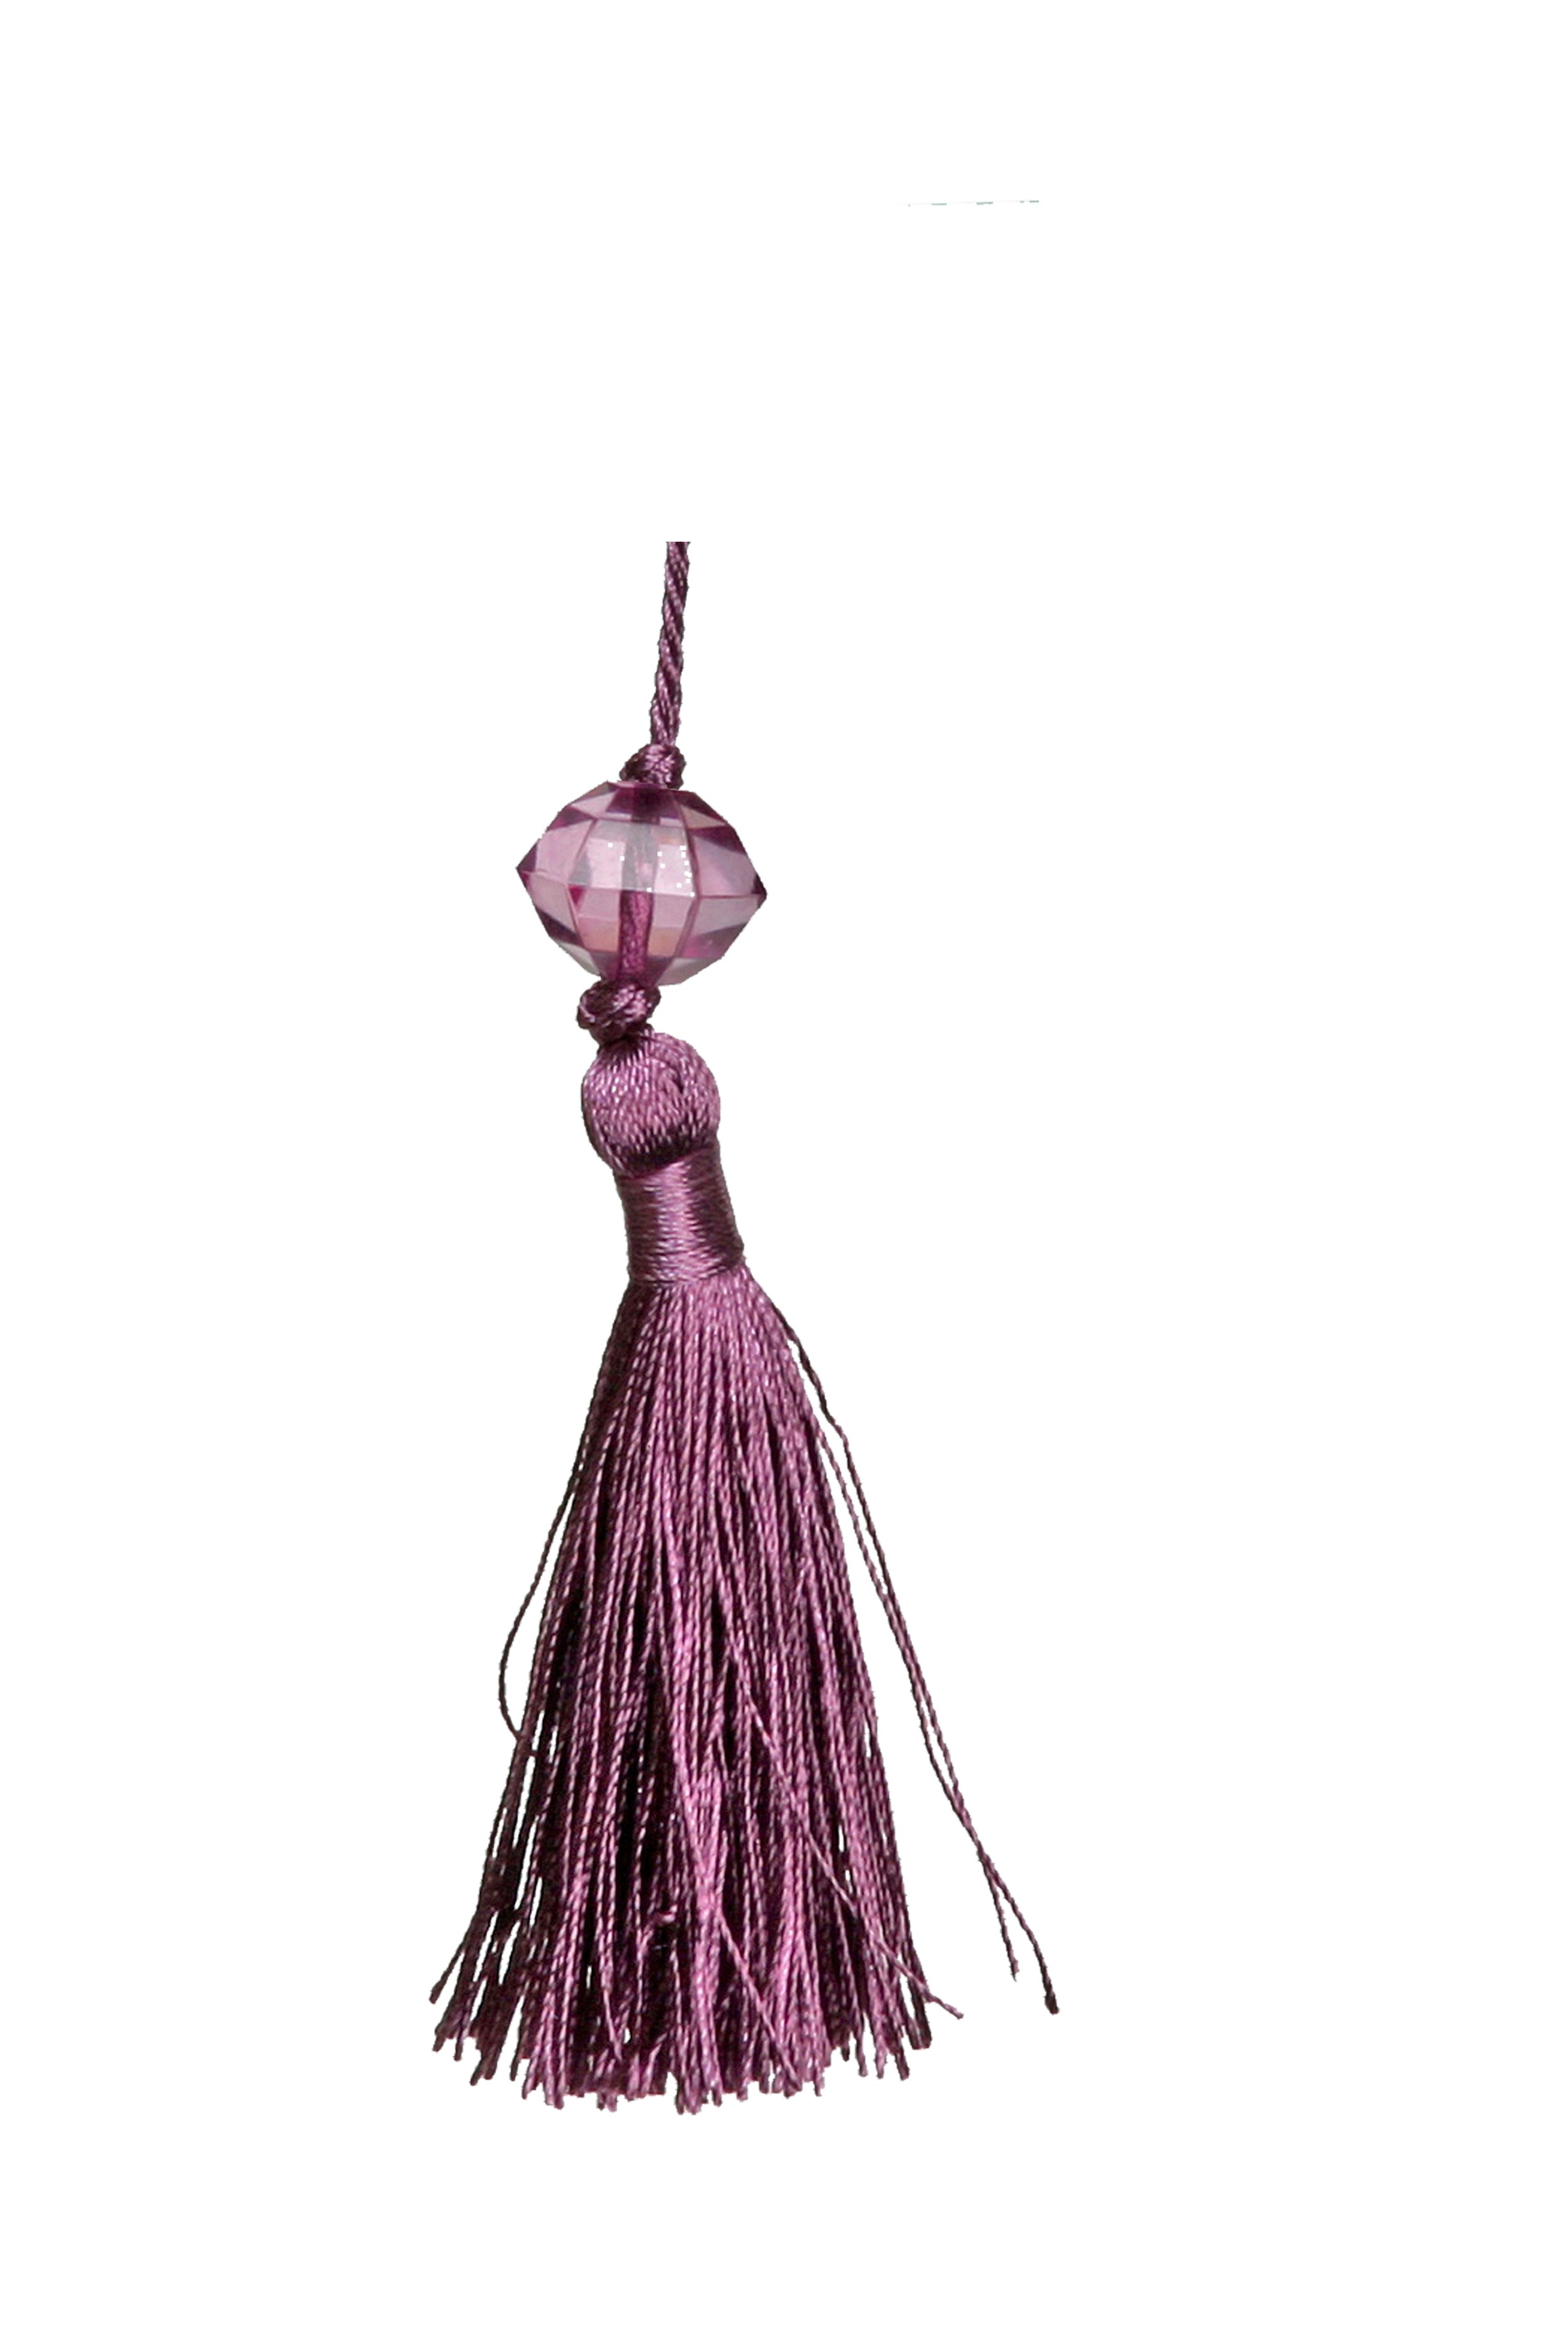 Small Tassel with bead - Purple 6.5cm Pack of 5